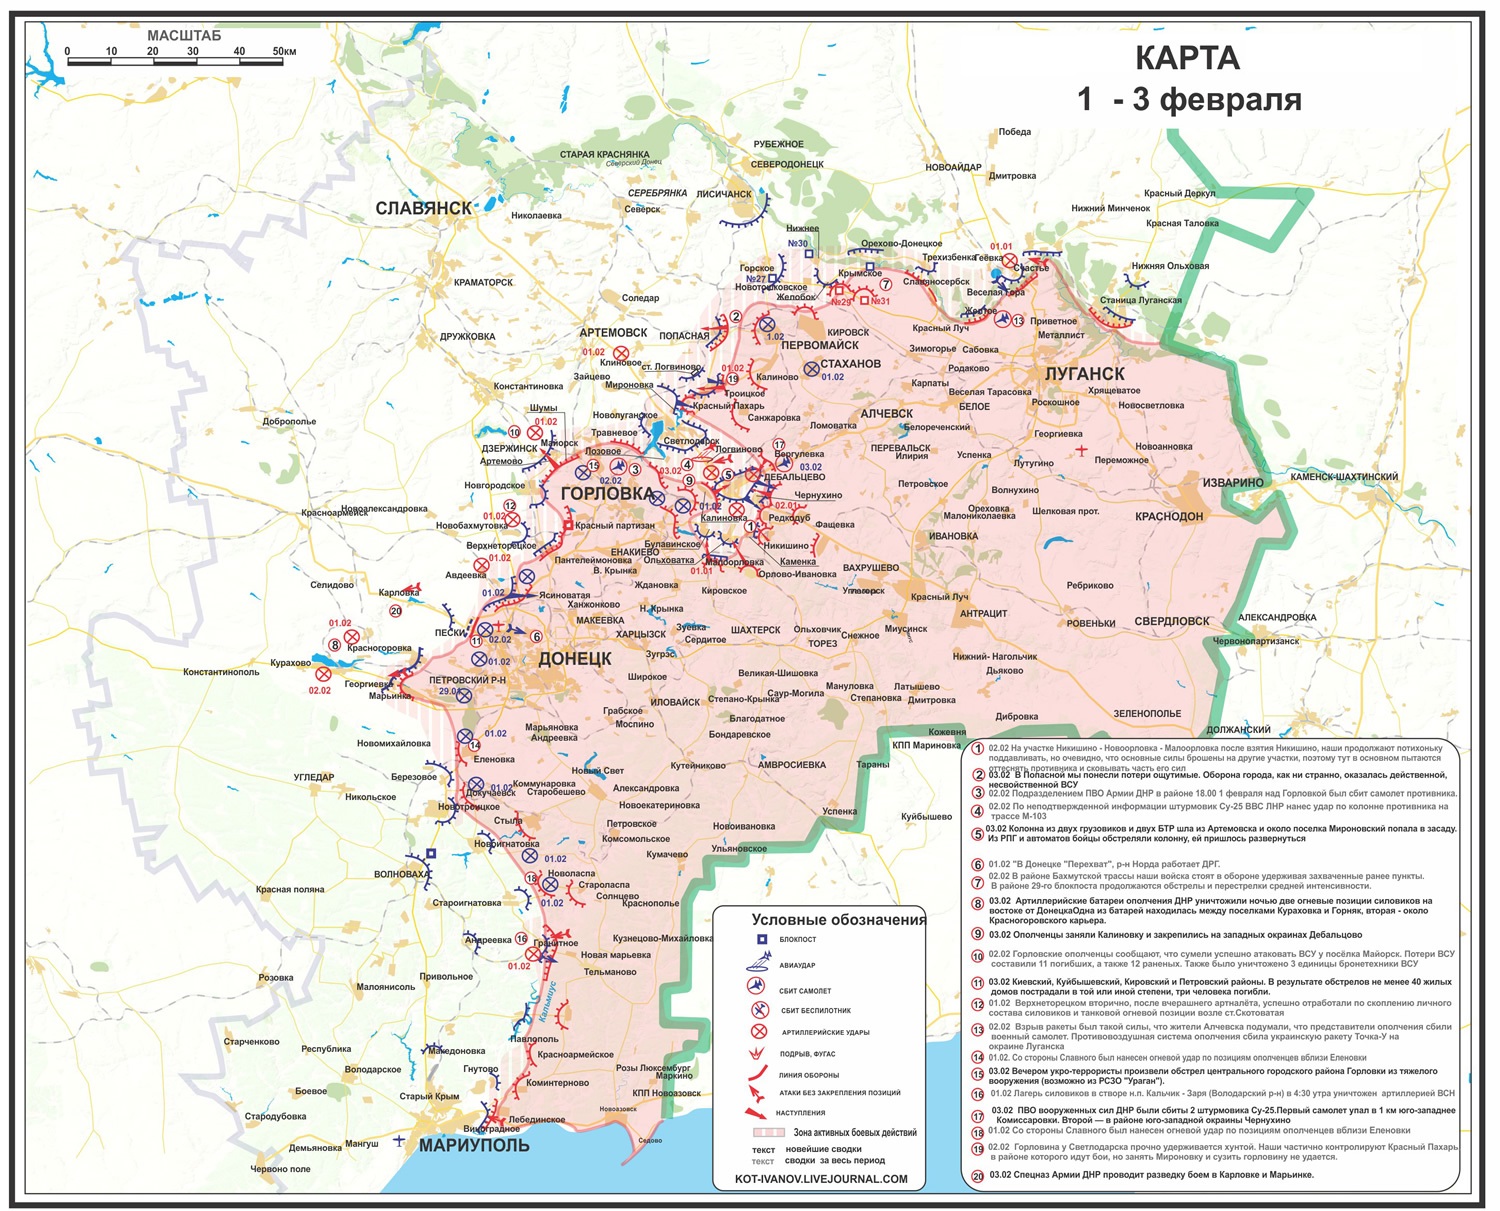 Map of the boundaries of the LNR and DNR on 01.02.2015